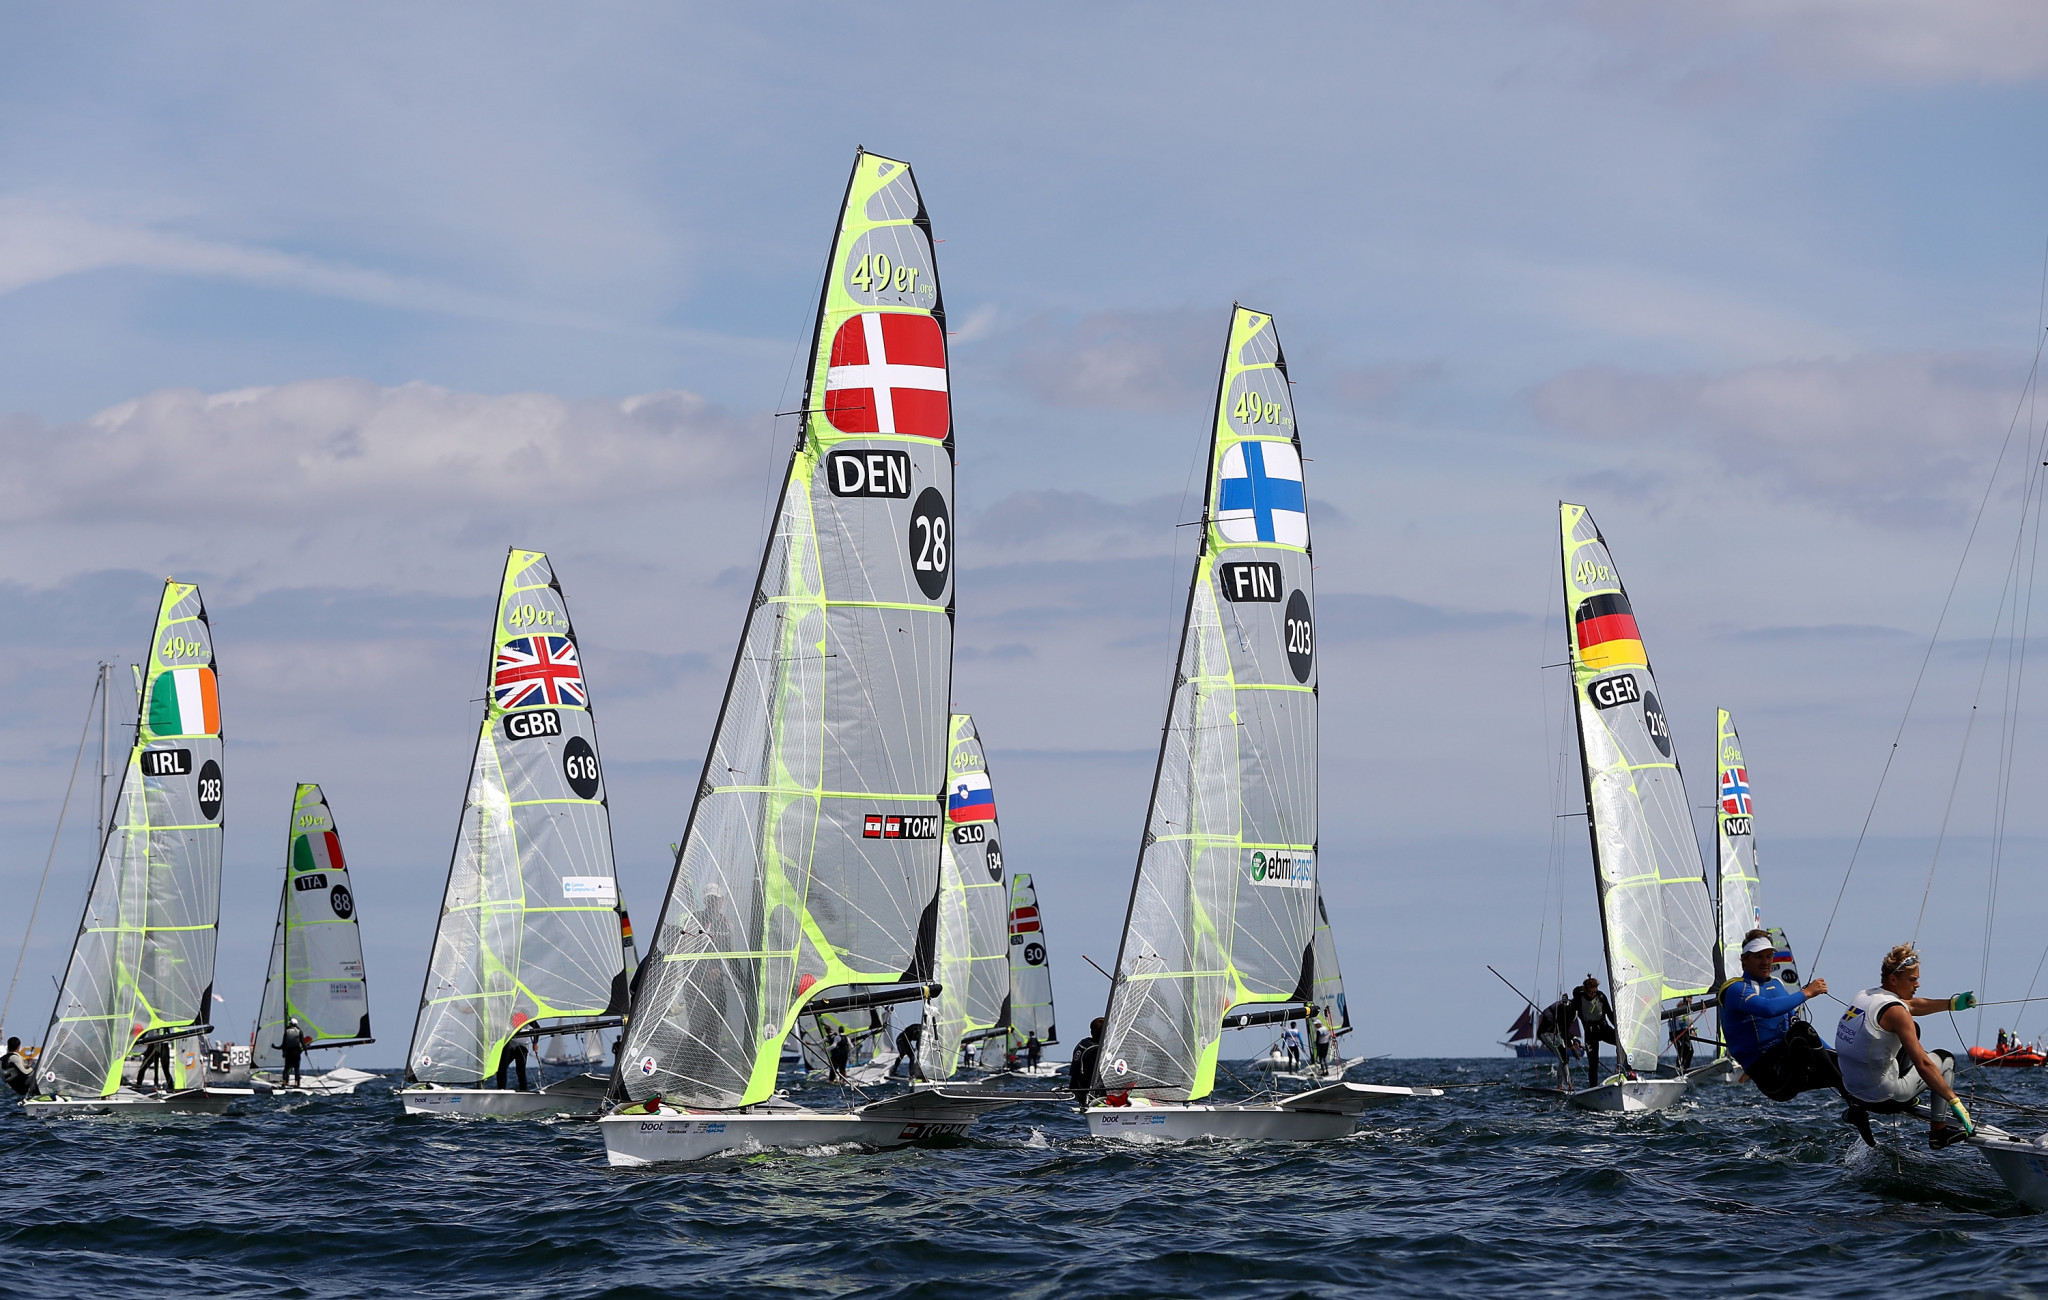 A 49er regatta will feature at the 2019 Pan American Games after the Organising Committee agreed to increase sailing's athlete quota ©Getty Images